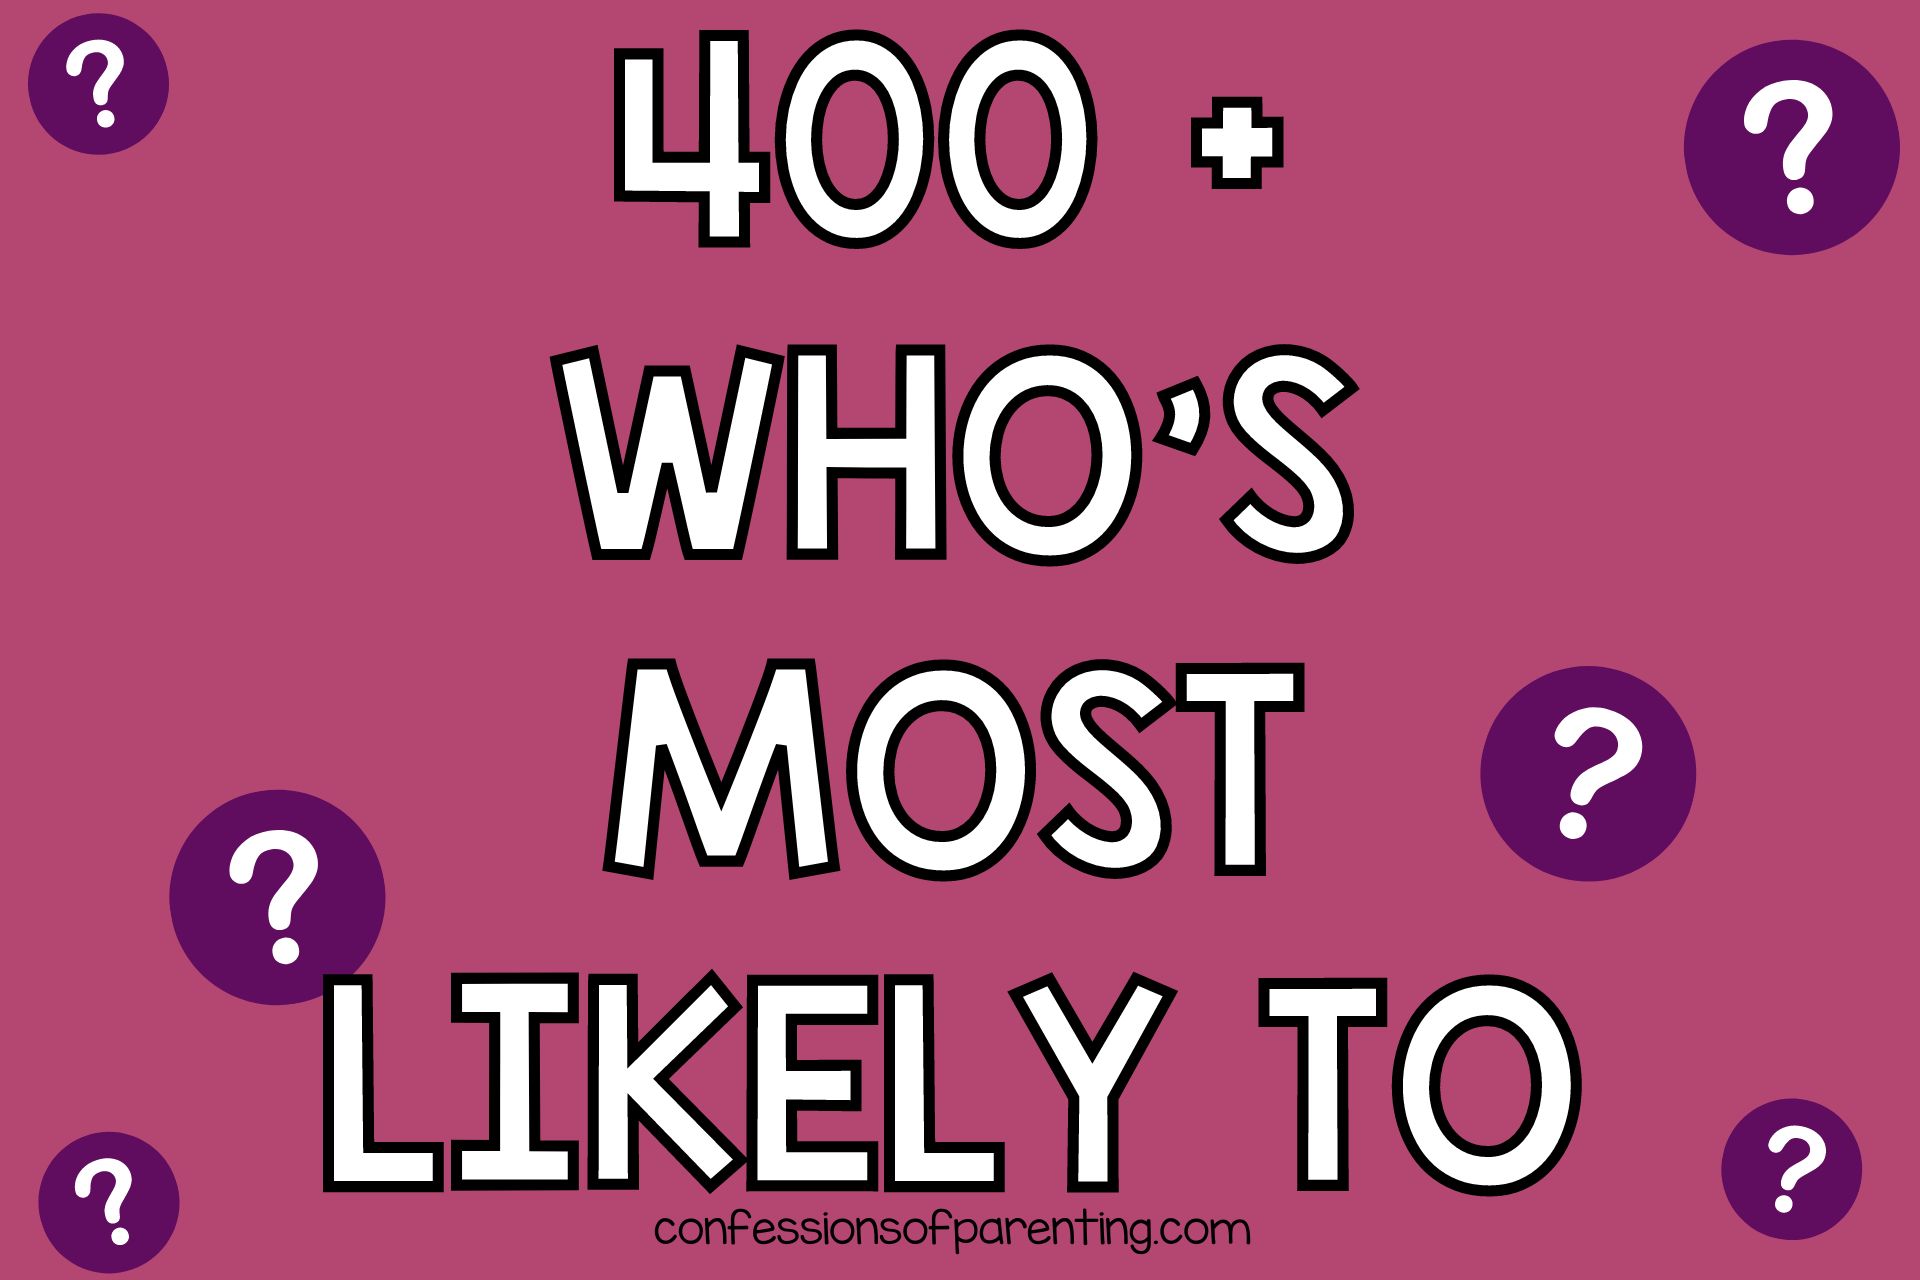 400 Who's Most Likely To Questions + Printable Cards!